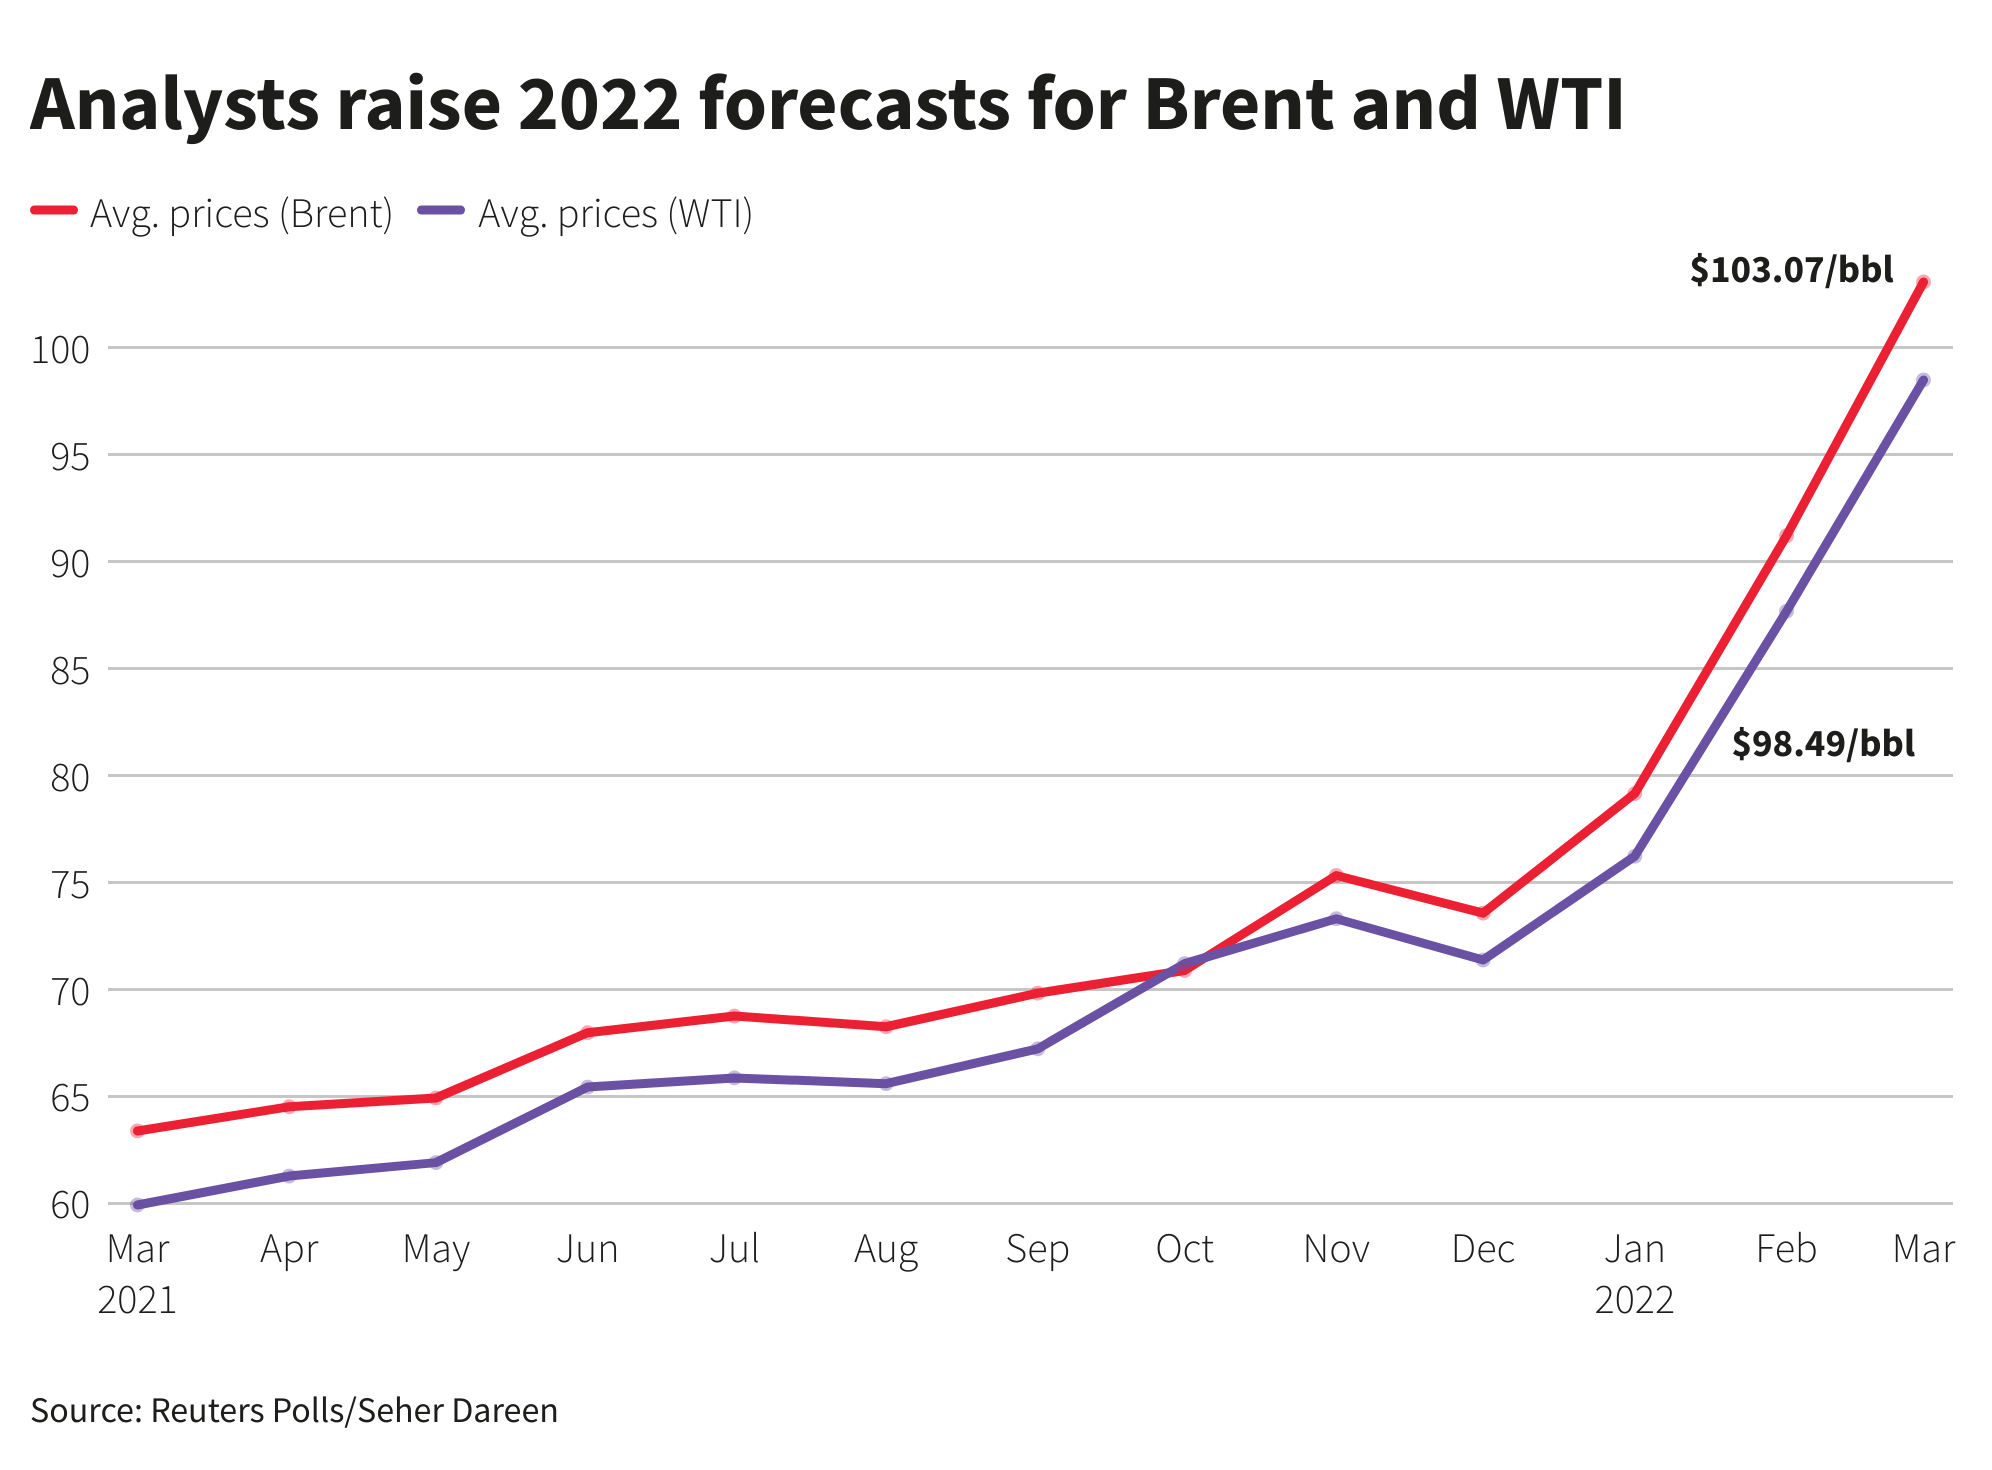 Oil price forecasts for 2022